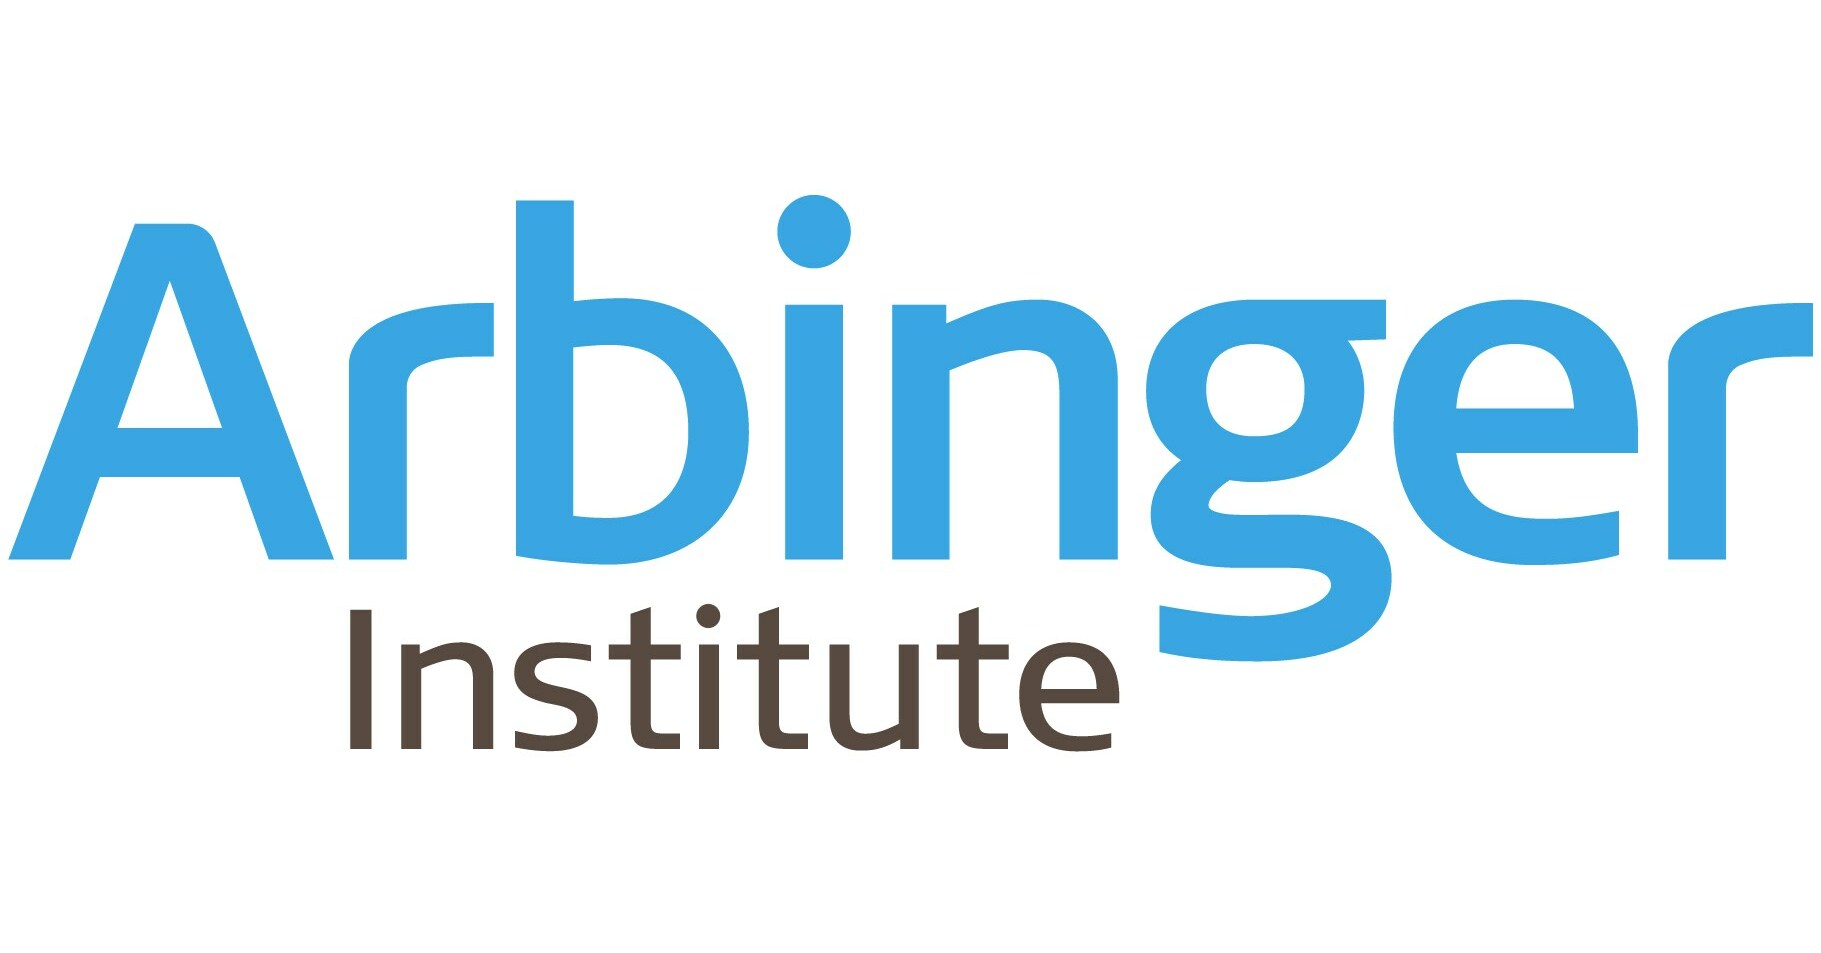 Arbinger Institute Recognized for its Support of Veterans within the Workplace